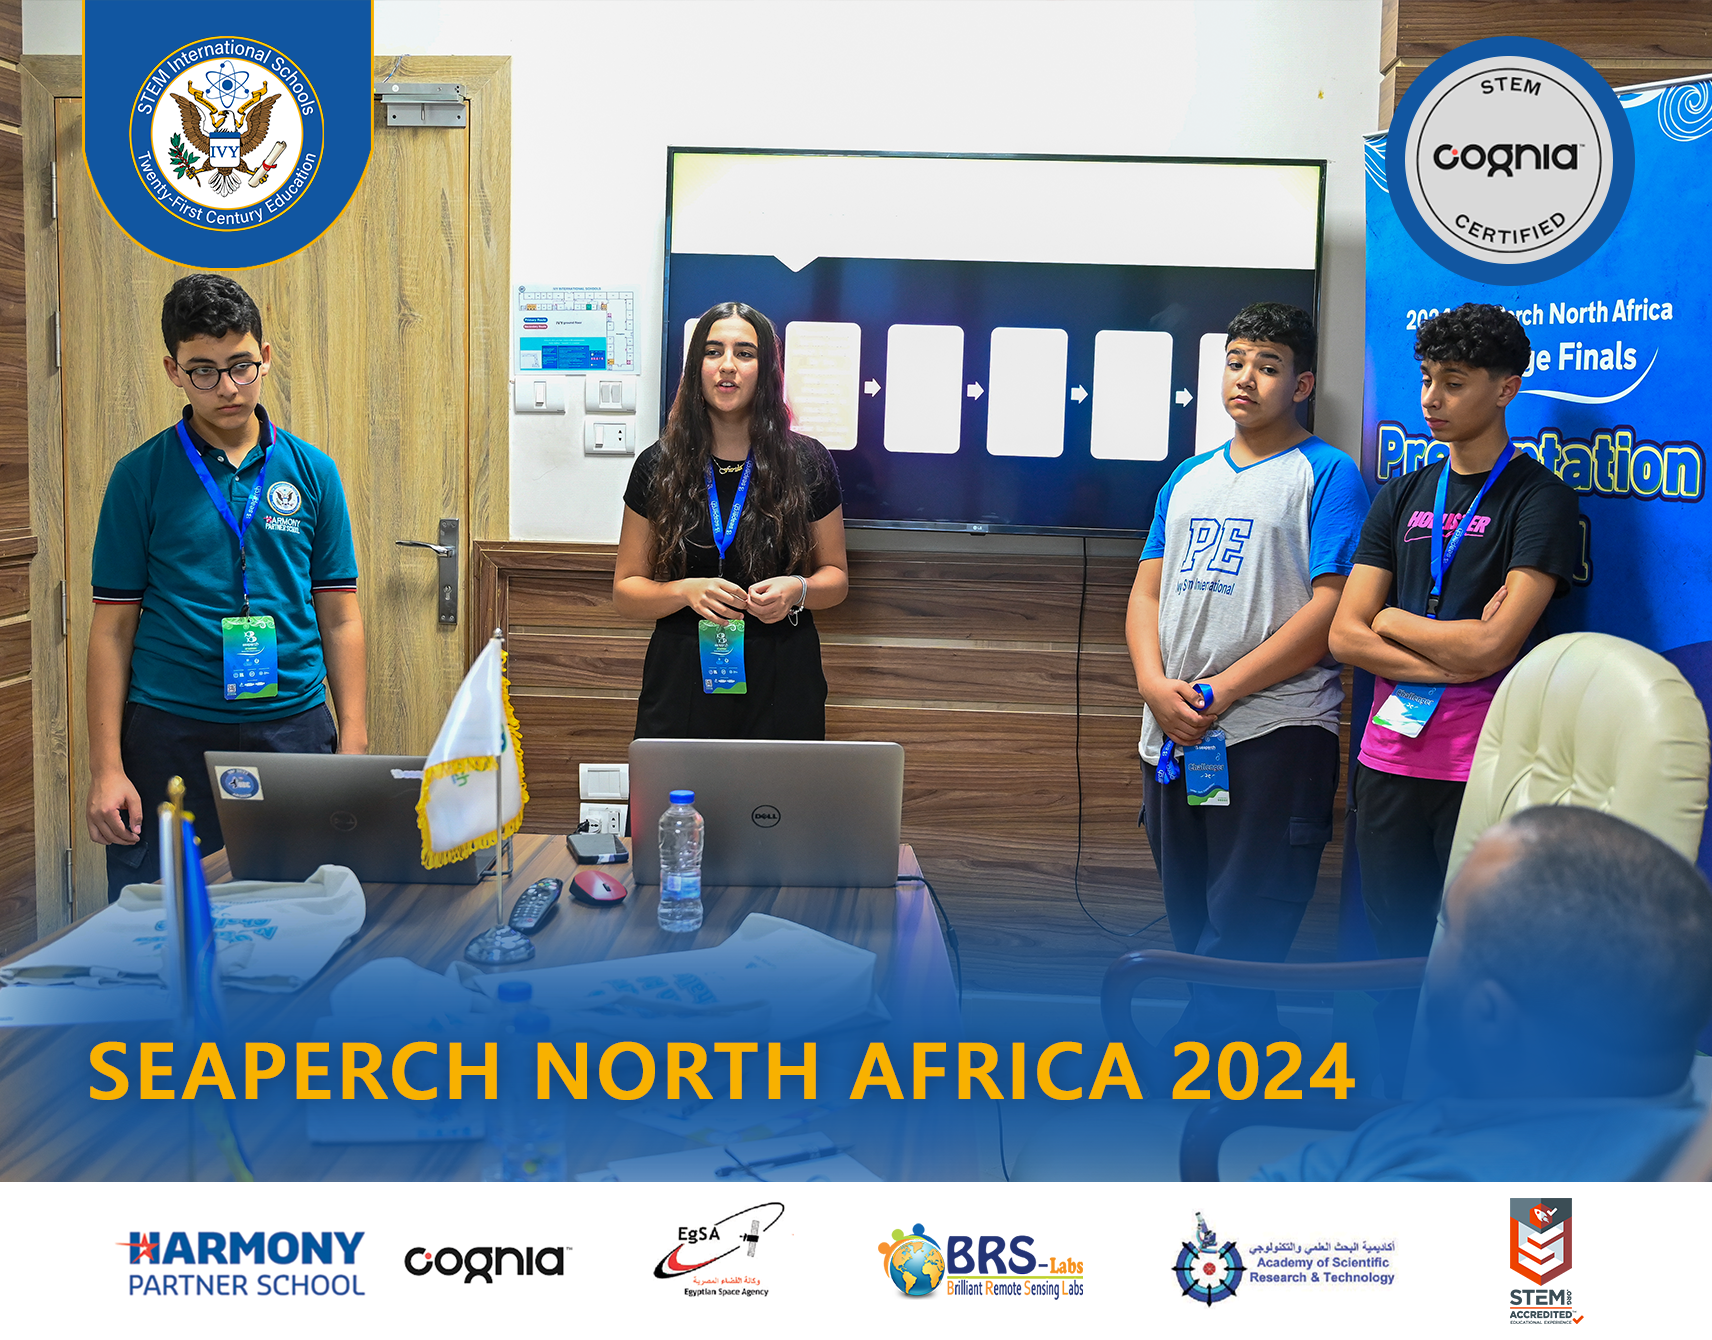 SEAPERCH NORTH AFRICA 2024 HOSTED AT IVY STEM INTERNATIONAL SCHOOLS